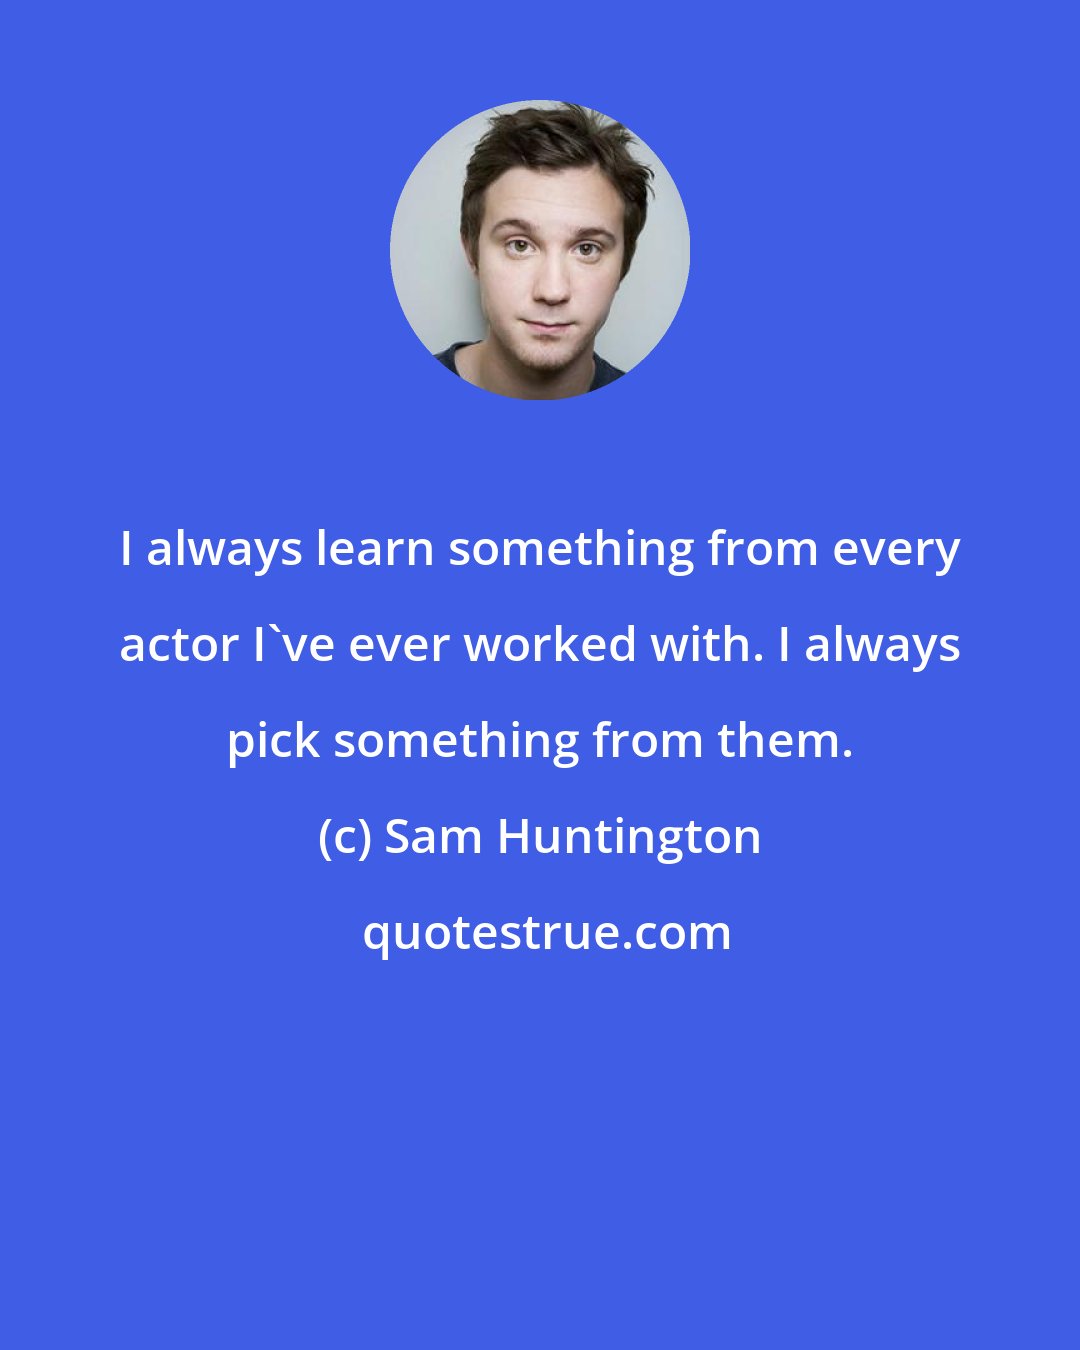 Sam Huntington: I always learn something from every actor I've ever worked with. I always pick something from them.